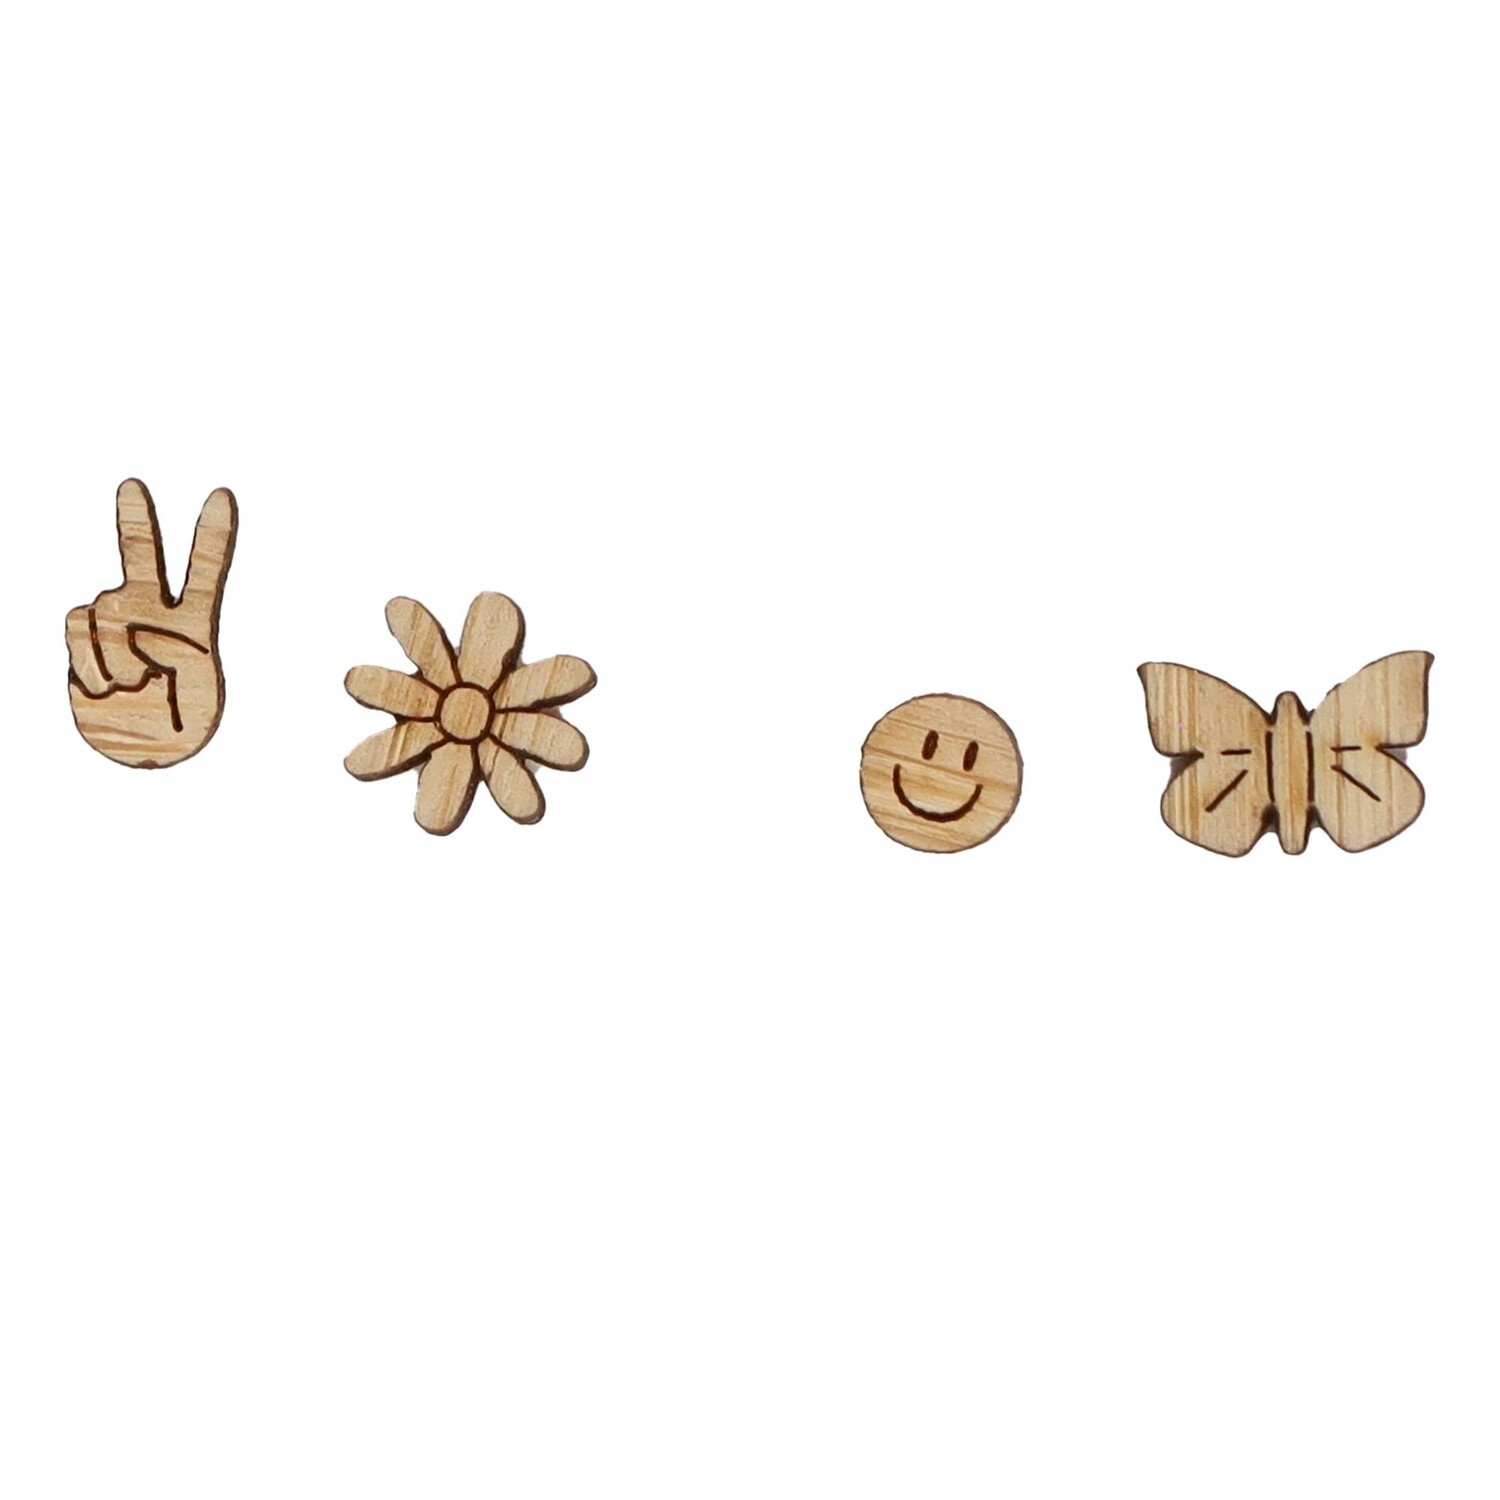 4 earring pack - Peace, Daisy, Smile and Butterfly